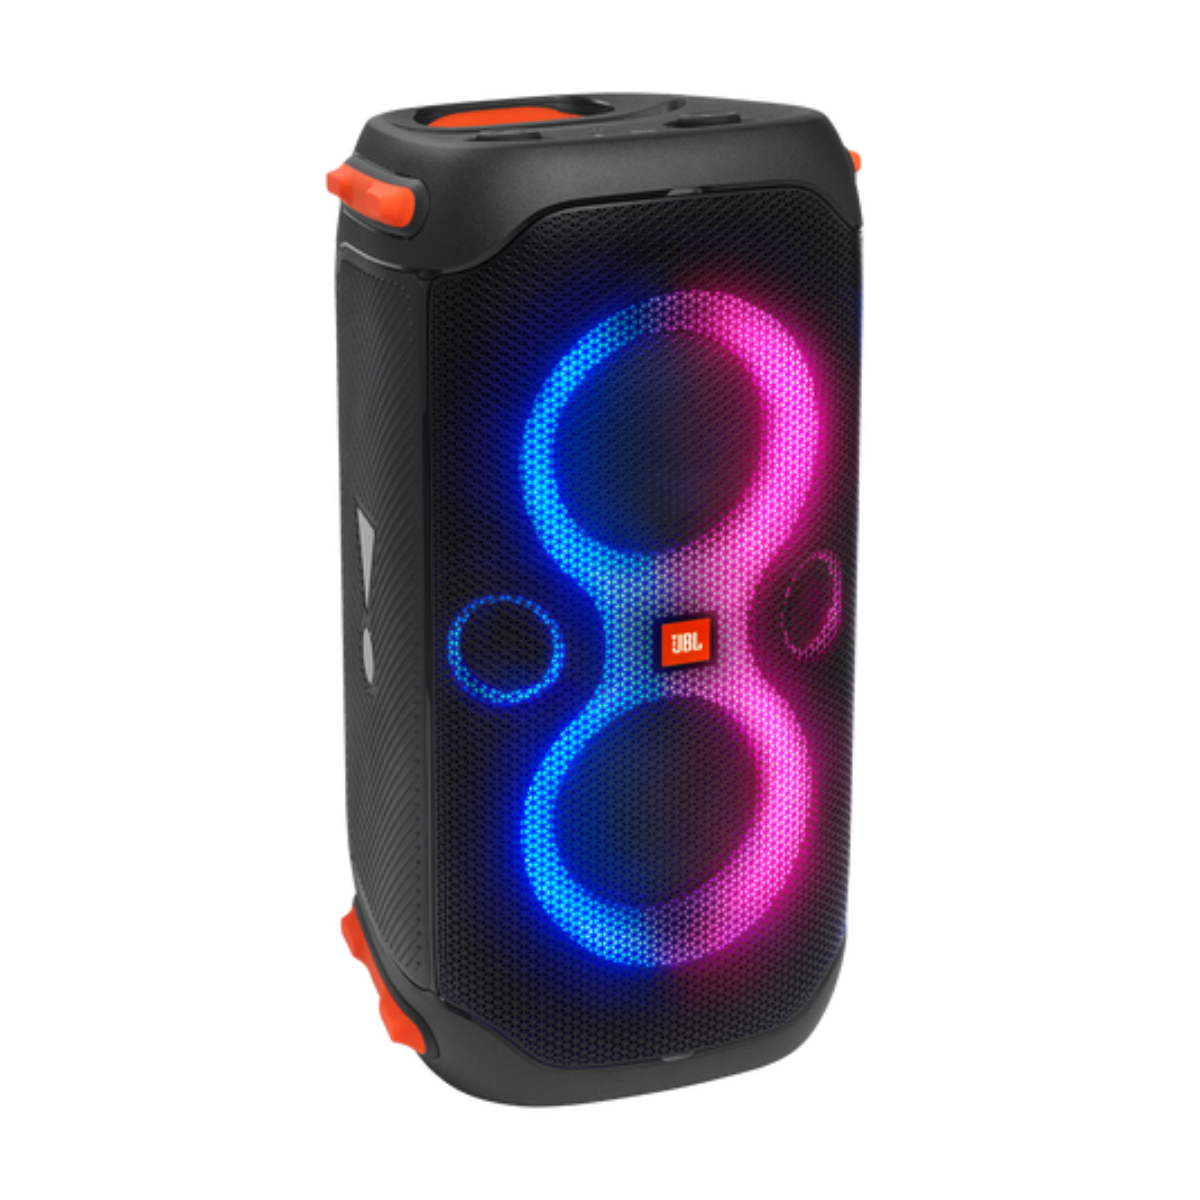 JBL Partybox 110 Portable party speaker with long battery, exciting sound and light show